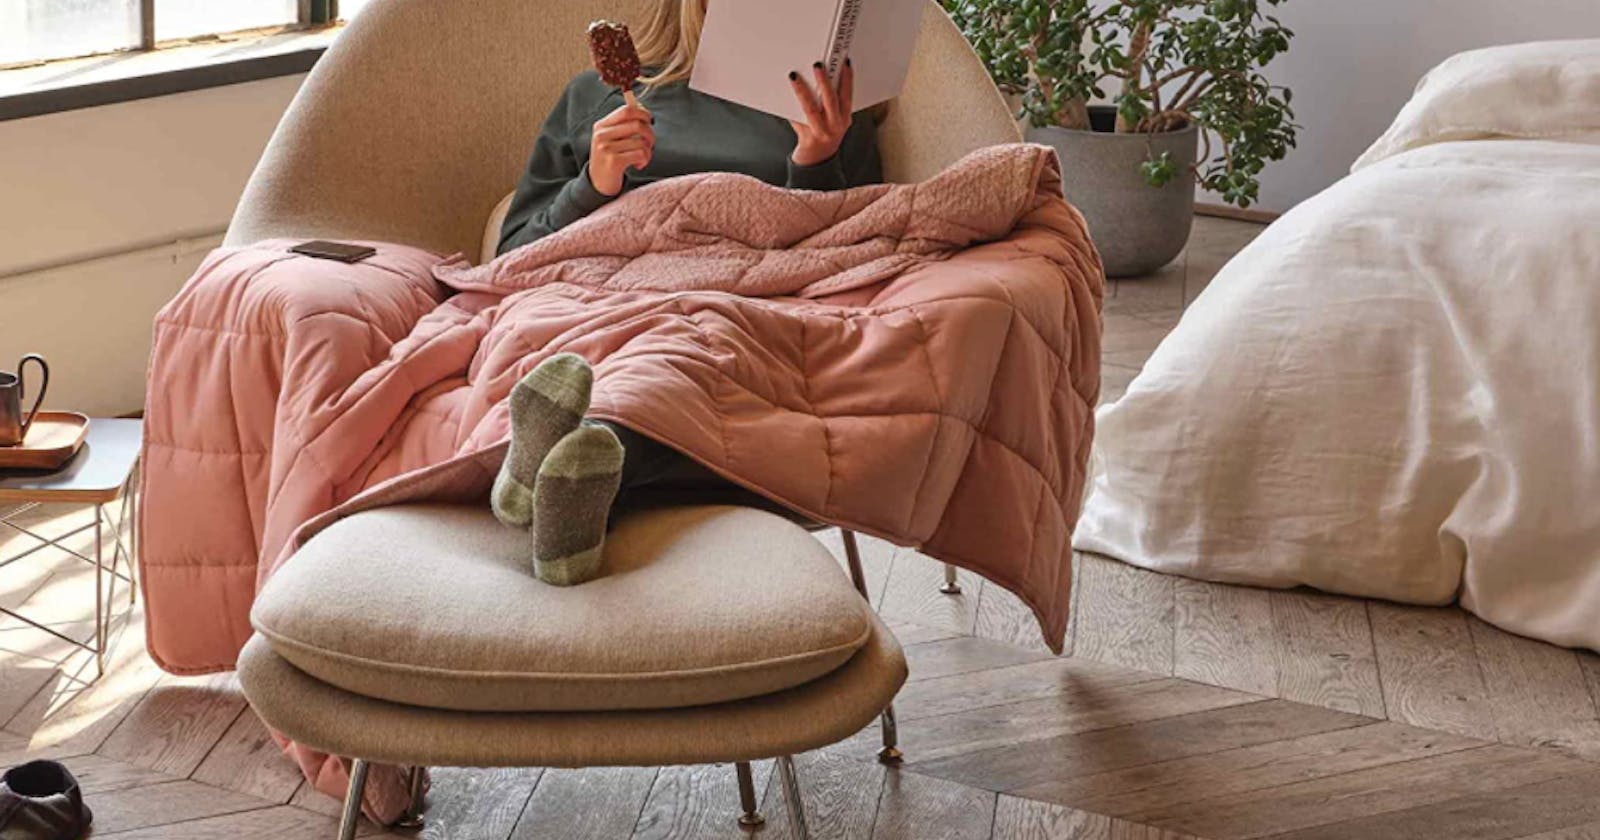 Top 5 Winter Blanket Trends: Stay Warm and On-Trend This Season